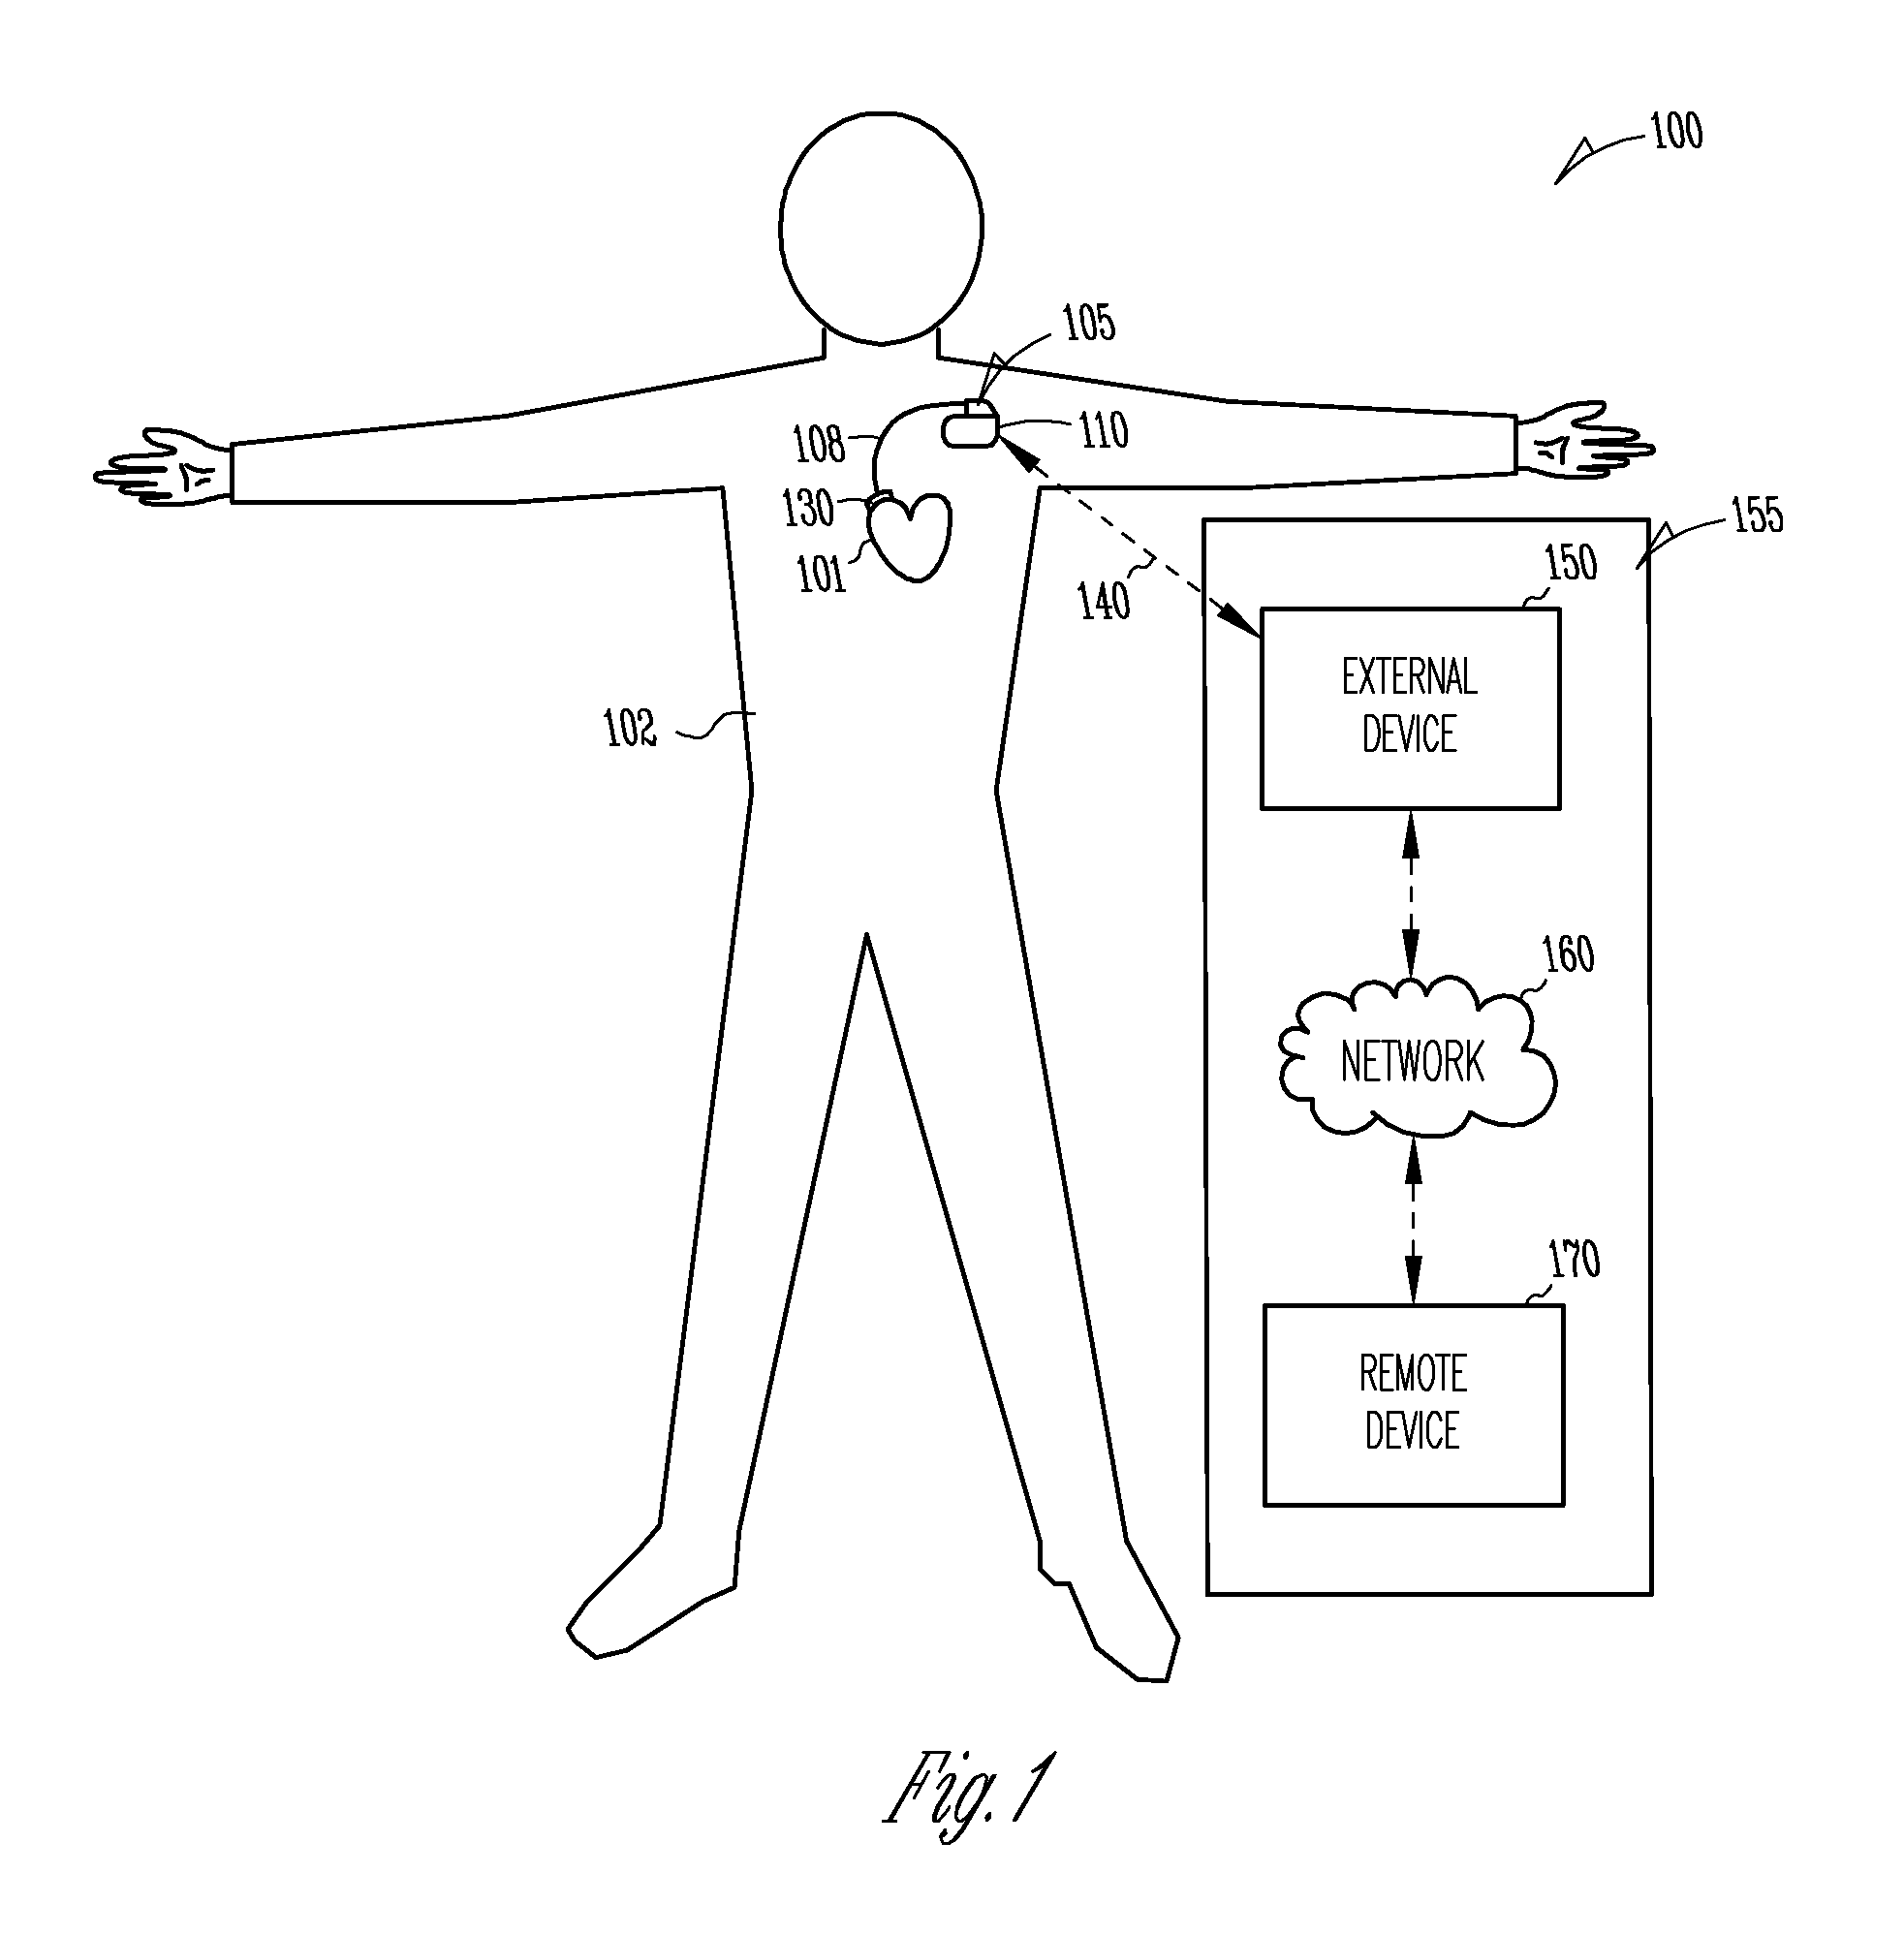 Method for preparing an implantable controlled gene or protein delivery device